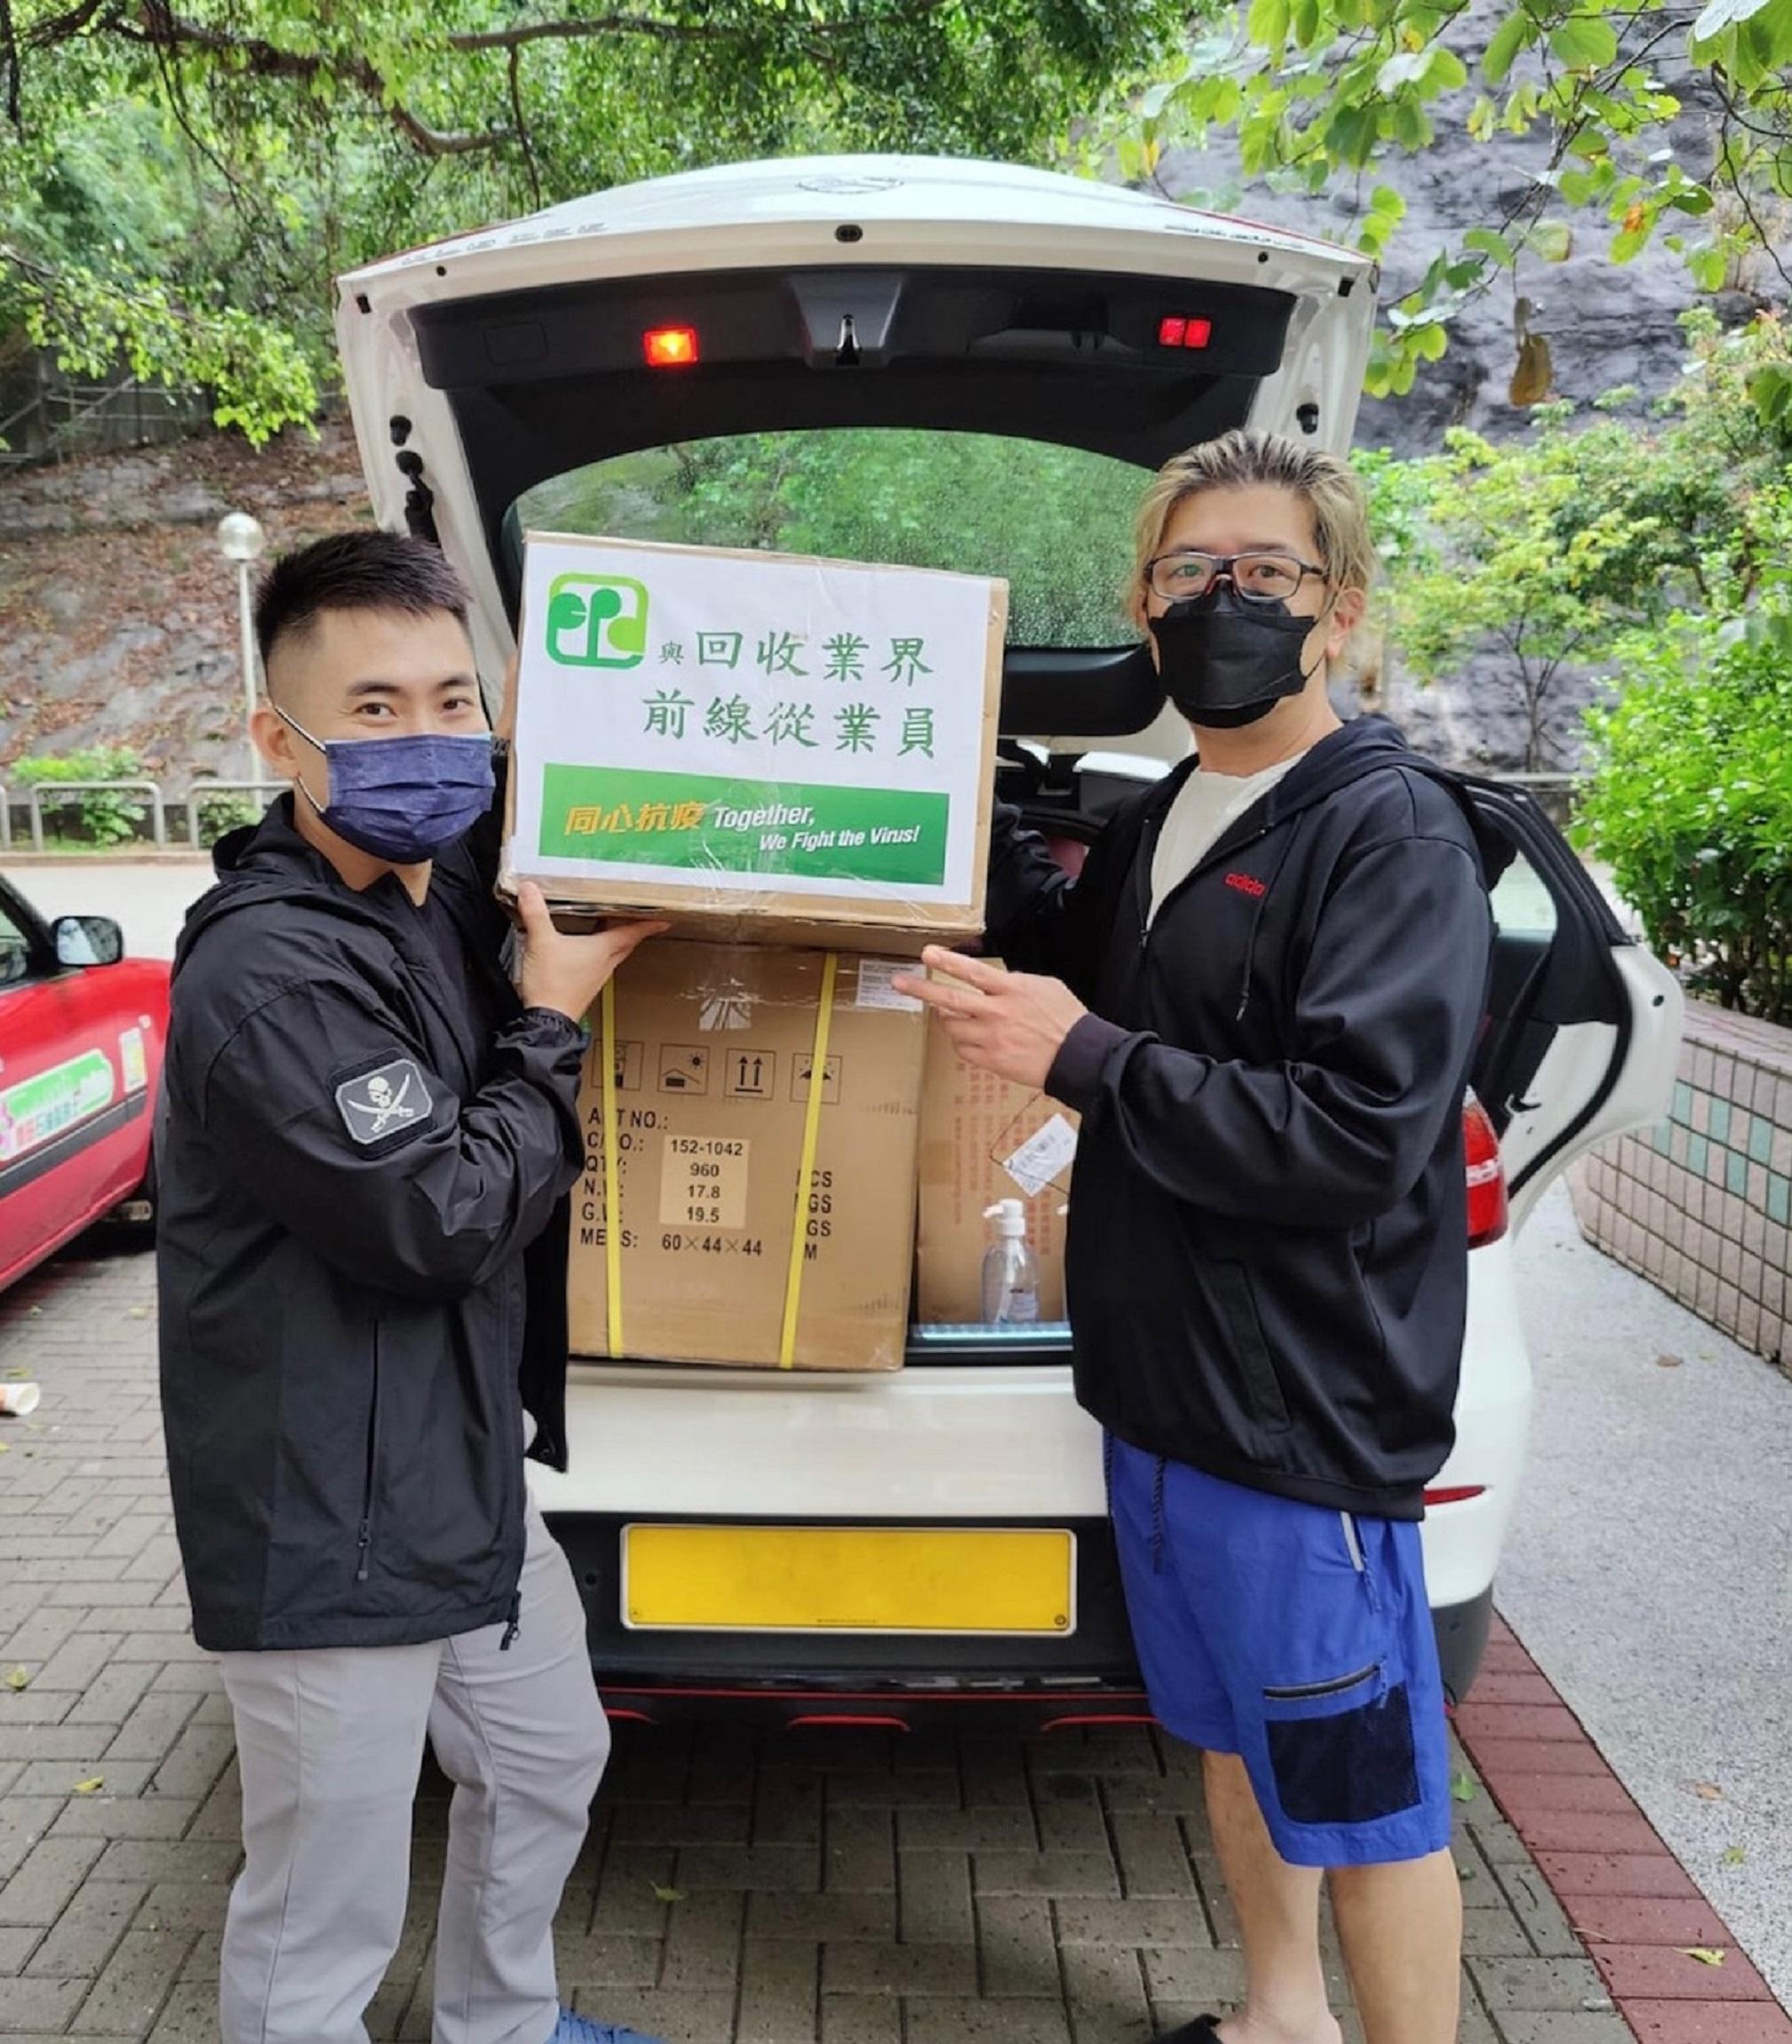 The Environmental Protection Department (EPD) has distributed a total of about 24 000 rapid antigen test (RAT) kits and 24 000 boxes of anti-epidemic proprietary Chinese medicines donated by the Central Government to various recycling trade associations and recycling service contractors, so as to provide anti-epidemic support to the frontline staff. Picture shows frontline recycling staff receiving RAT kits and anti-epidemic proprietary Chinese medicines distributed by the EPD.